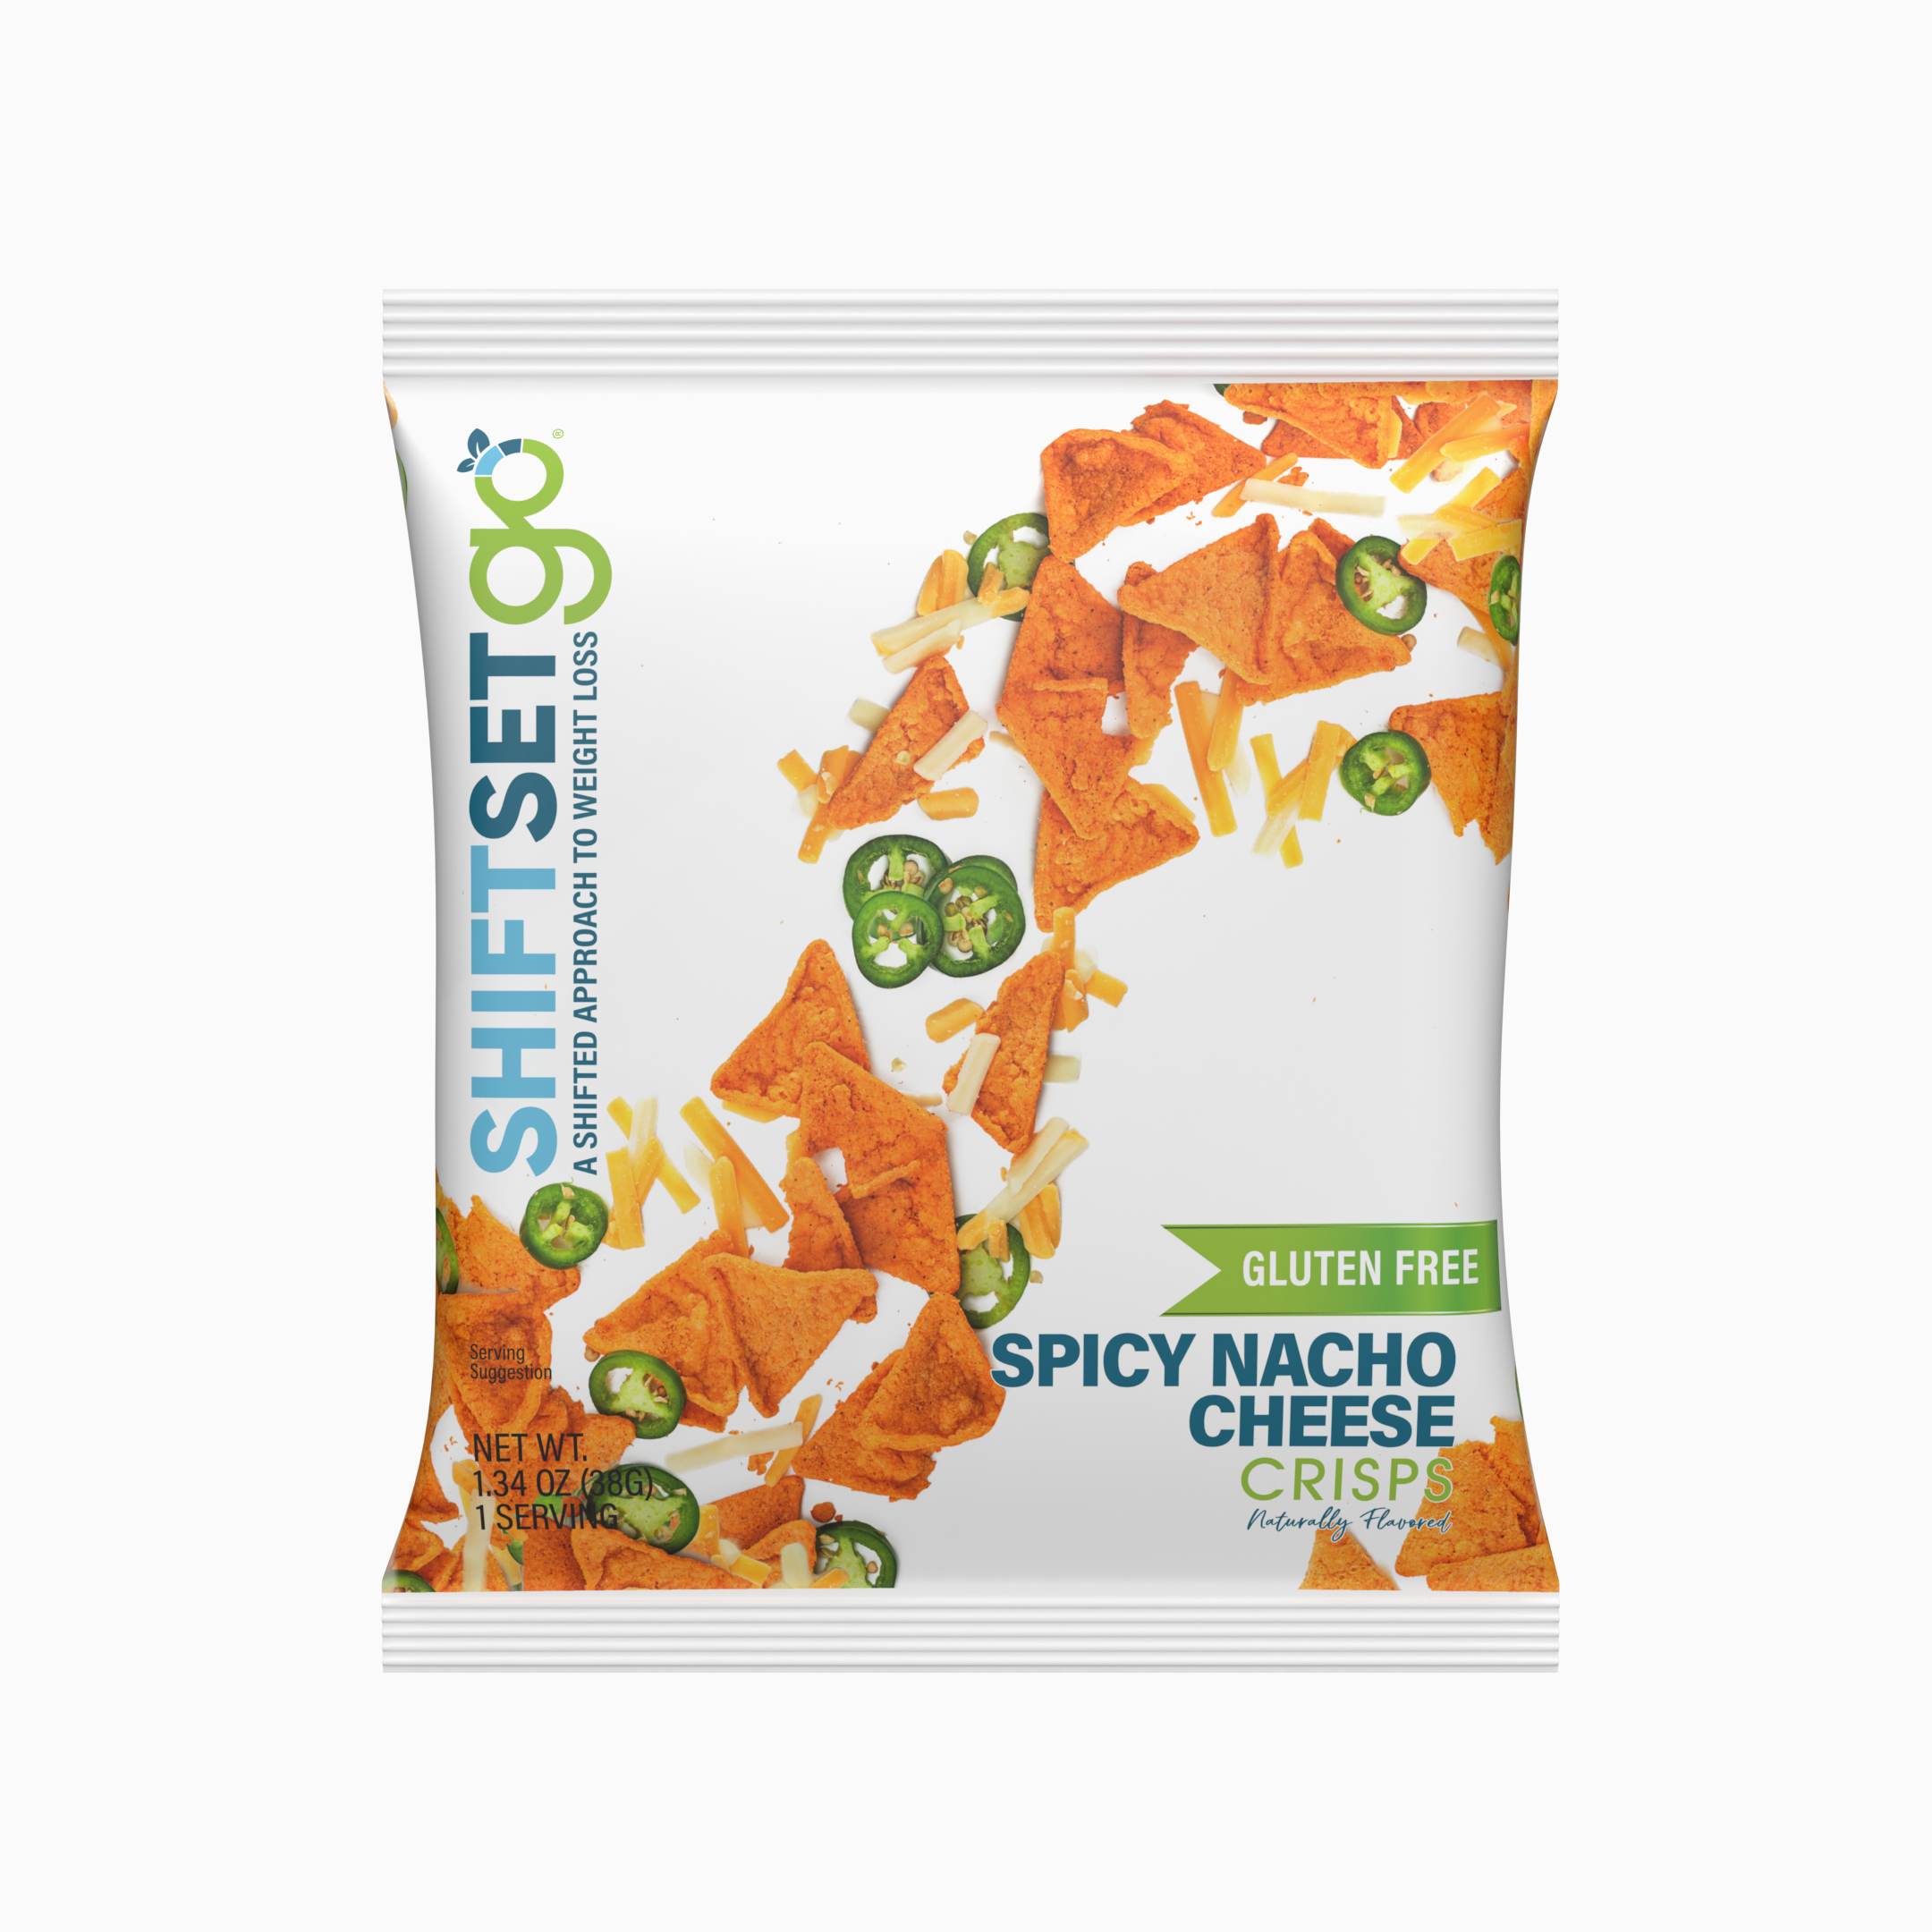 Reminiscent of a popular triangular crunchy snack. When you need a hit of spicy